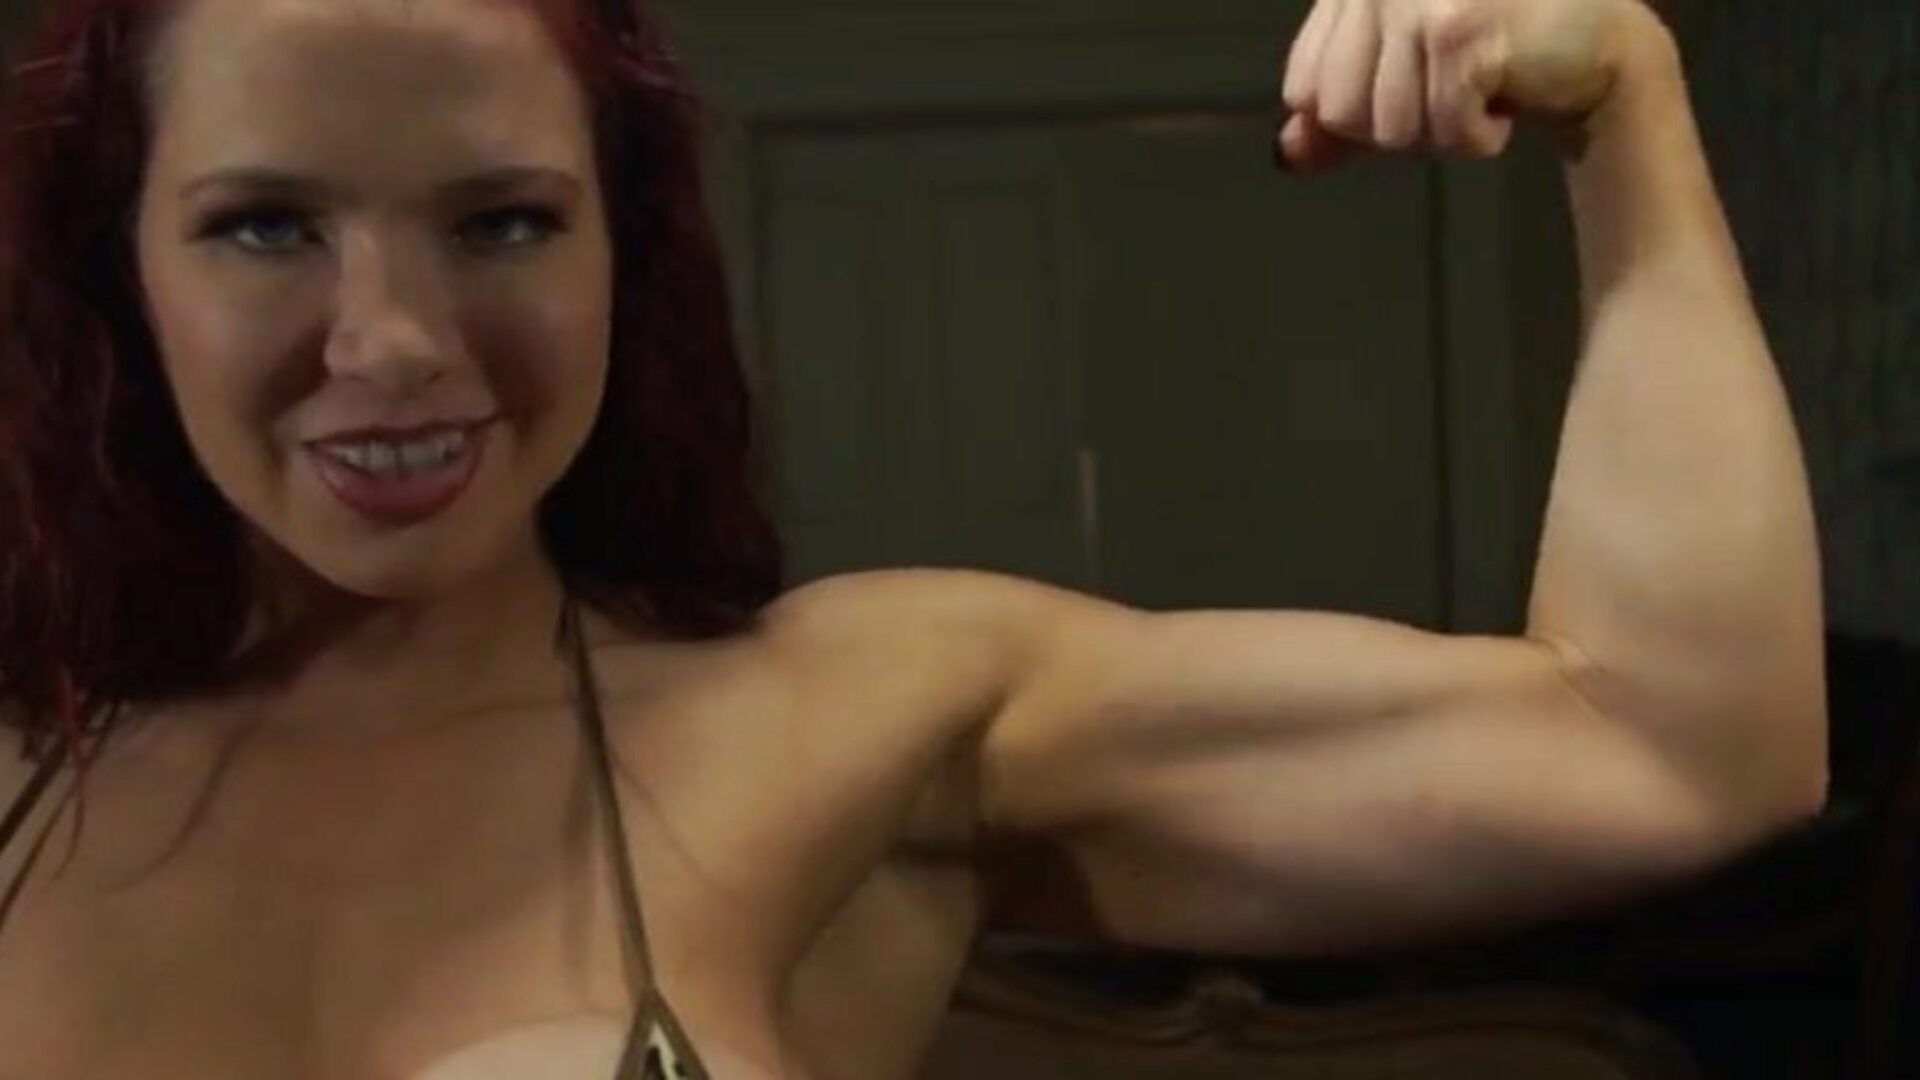 Muscle bound red-haired flexing and riding a skin colored marital-device Horny-looking redheaded cougar gives a decision to flash off her guns previous to pumping herself naive with a toy She flexes a pile in front of the camera while dressed in some of the sluttiest swimwear you can possibly imagine. Her fake bra buddies are grotesquely misshapen and misplaced, but some of u might not care about it as long as this hardbody playgirl keeps on flexing, demonstrating off her back muscles, and whatnot. At around the midway point of the clip we watch her go on all 4s and slip a finger in that leaking love tunnel She starts frigging herself like crazy whilst on all 4s moaning noisily and being horny in general. She then takes her beloved flesh-colored sex tool and continues to tear up herself even harder during the time that telling the nastiest crap you can possibly imagine. The whole thing is really passionate and you're sure to have a fun it no matter what. At the end, we get to see this strange-looking red-haired bodybuilder jizz Thank god we don't have to glance at her hilariously awful-looking bumpers any longer.